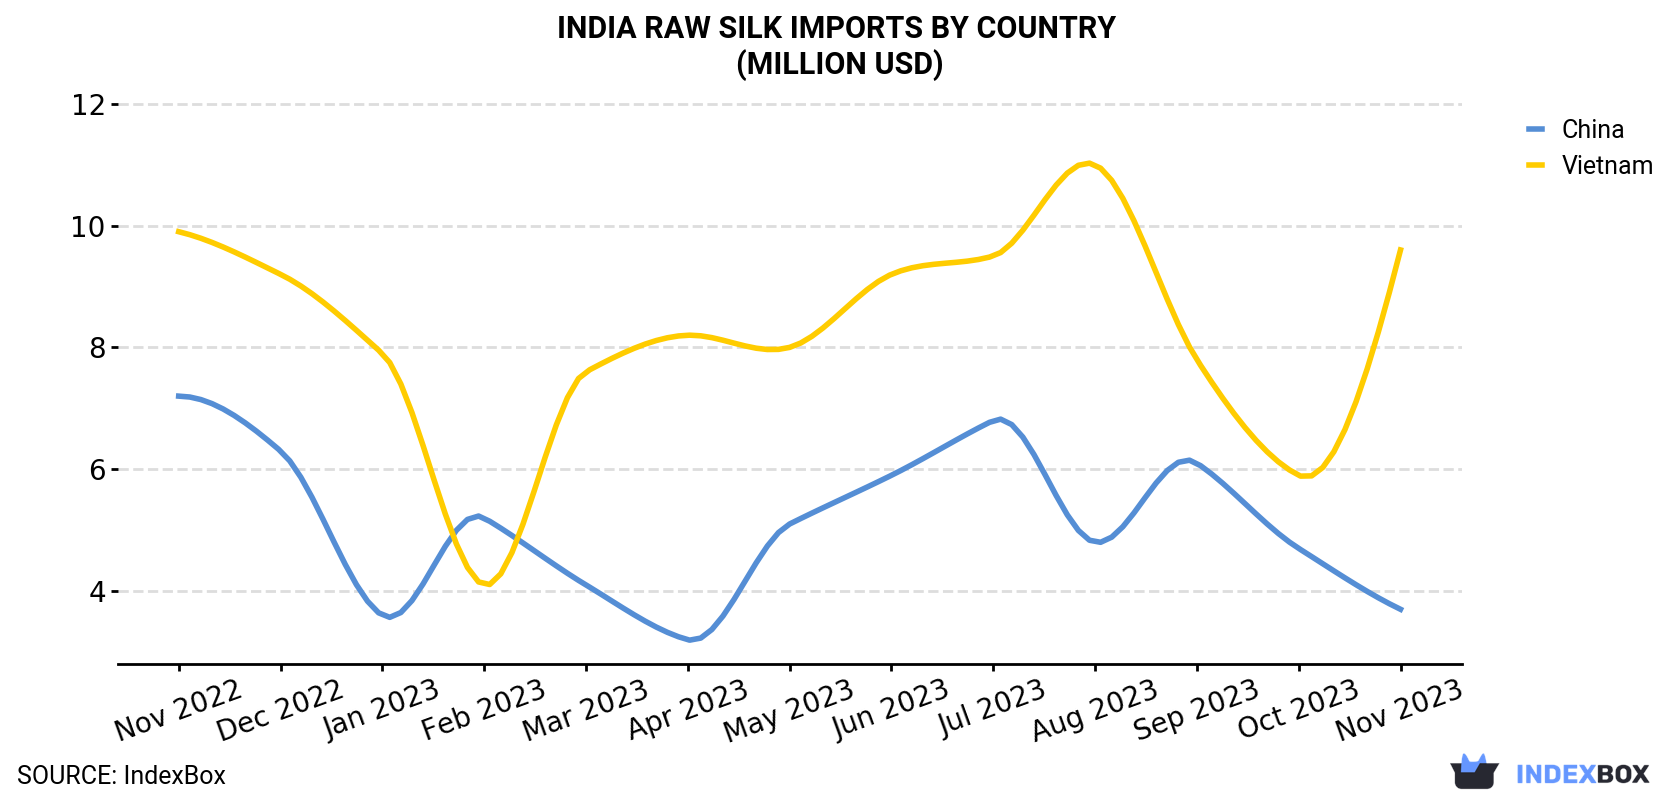 India Raw Silk Imports By Country (Million USD)